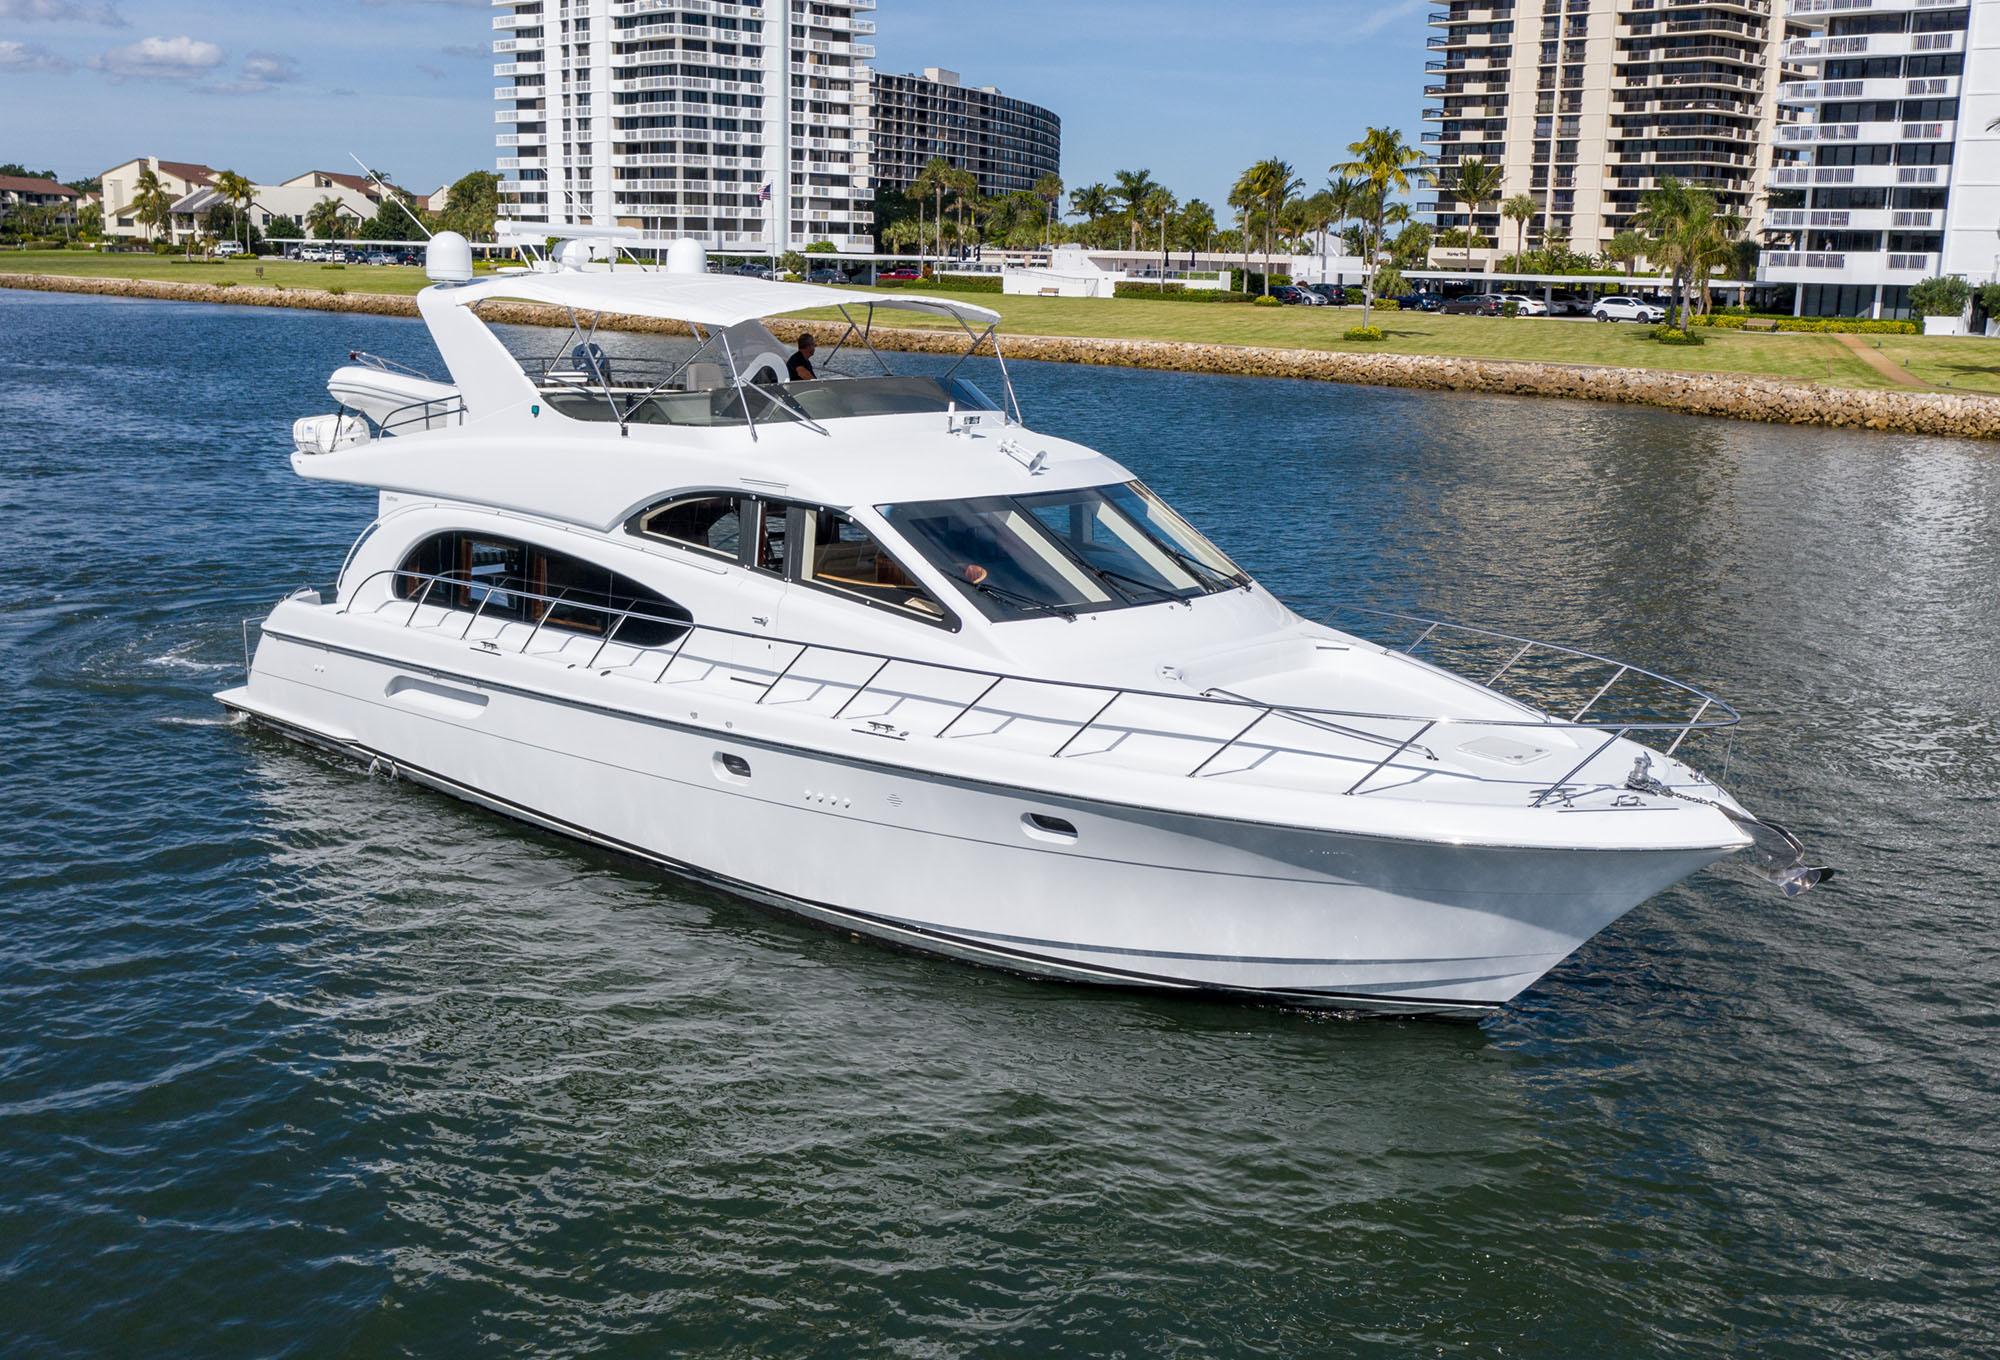 2002 Hatteras 63 Raised Pilothouse Motor Yacht DUE SOUTH | 63ft